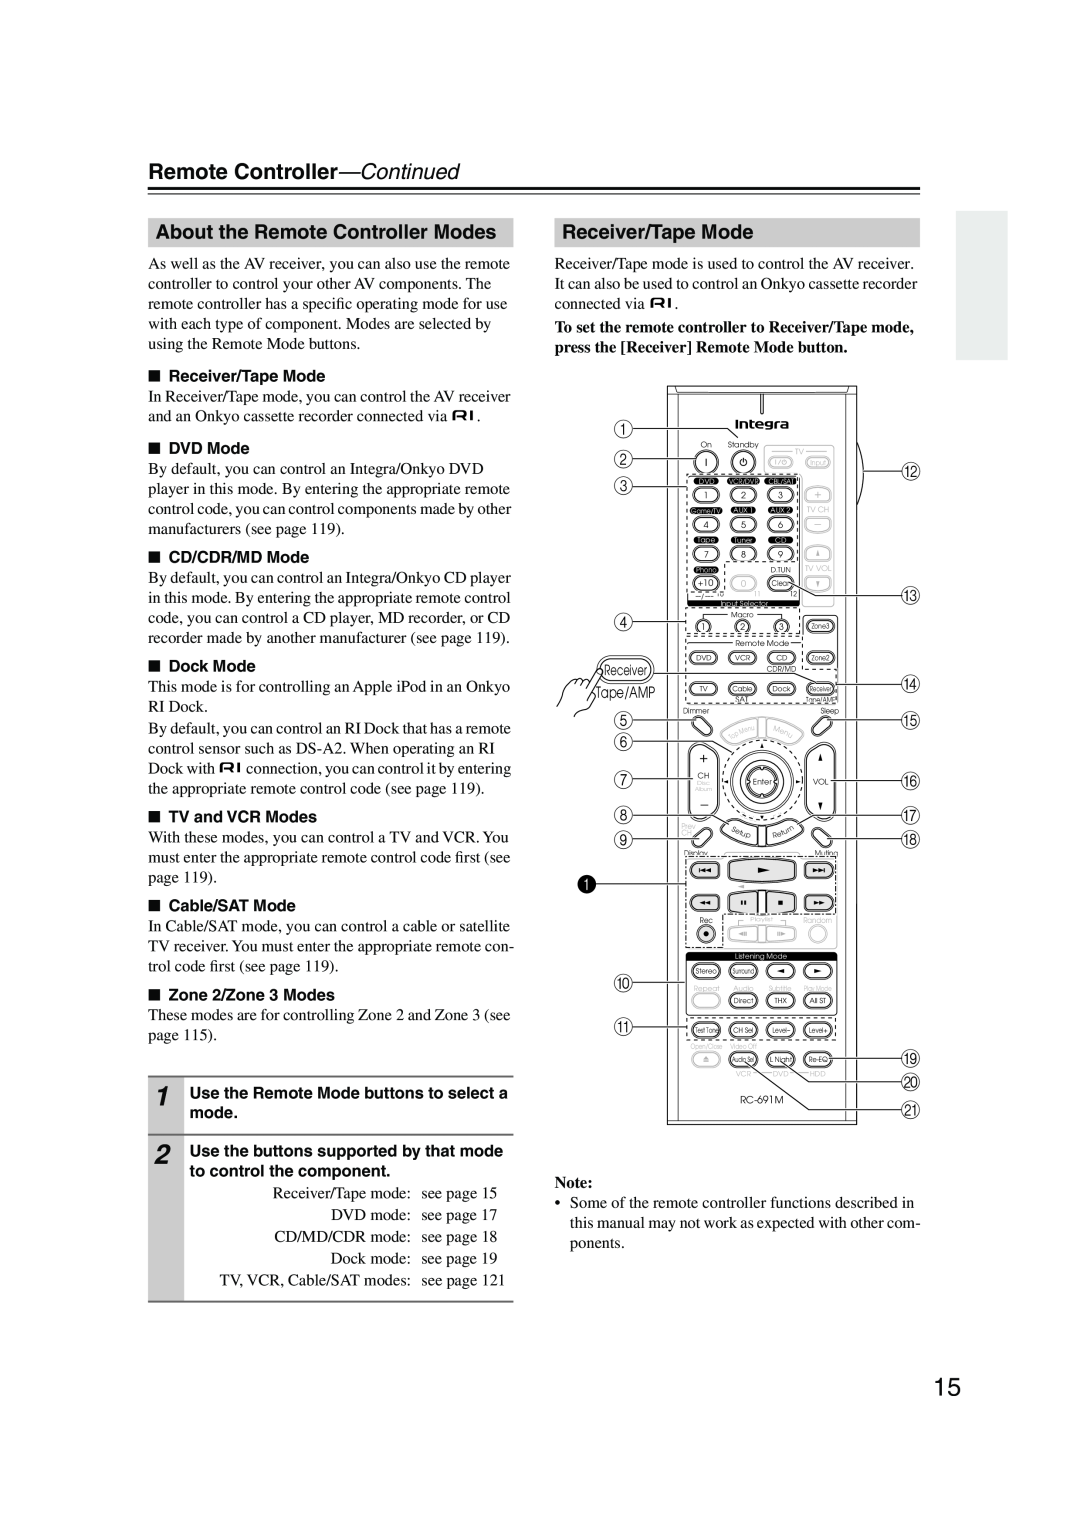 Integra DTR-7.8 instruction manual Remote Controller—Continued, About the Remote Controller Modes, Receiver/Tape Mode 